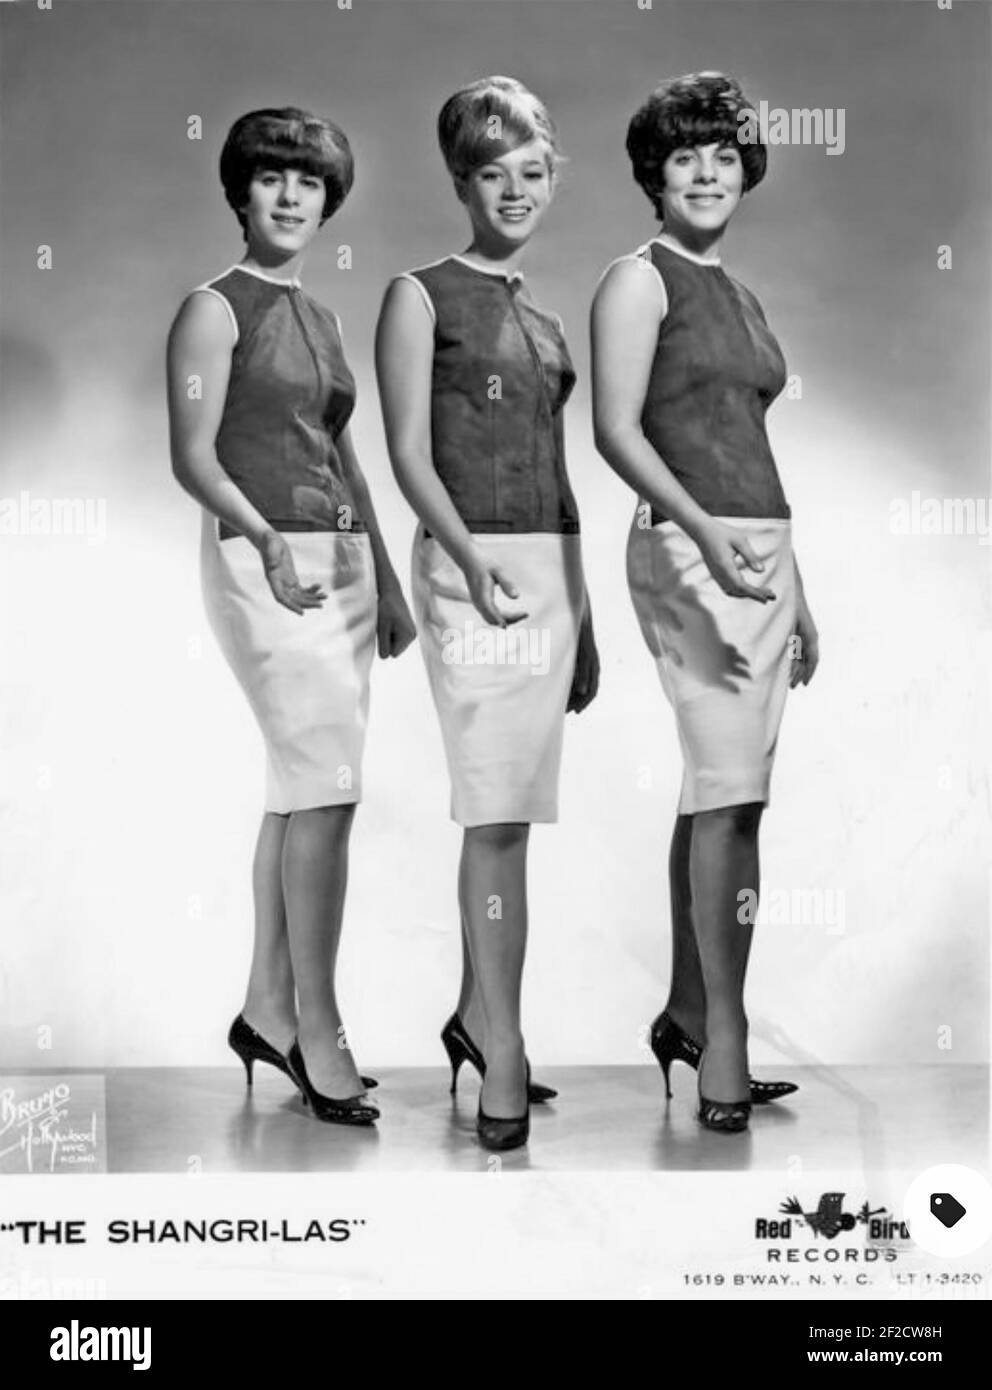 THE SHANGRI-LAS Promotional photo of American vocal group in 1964 Stock Photo